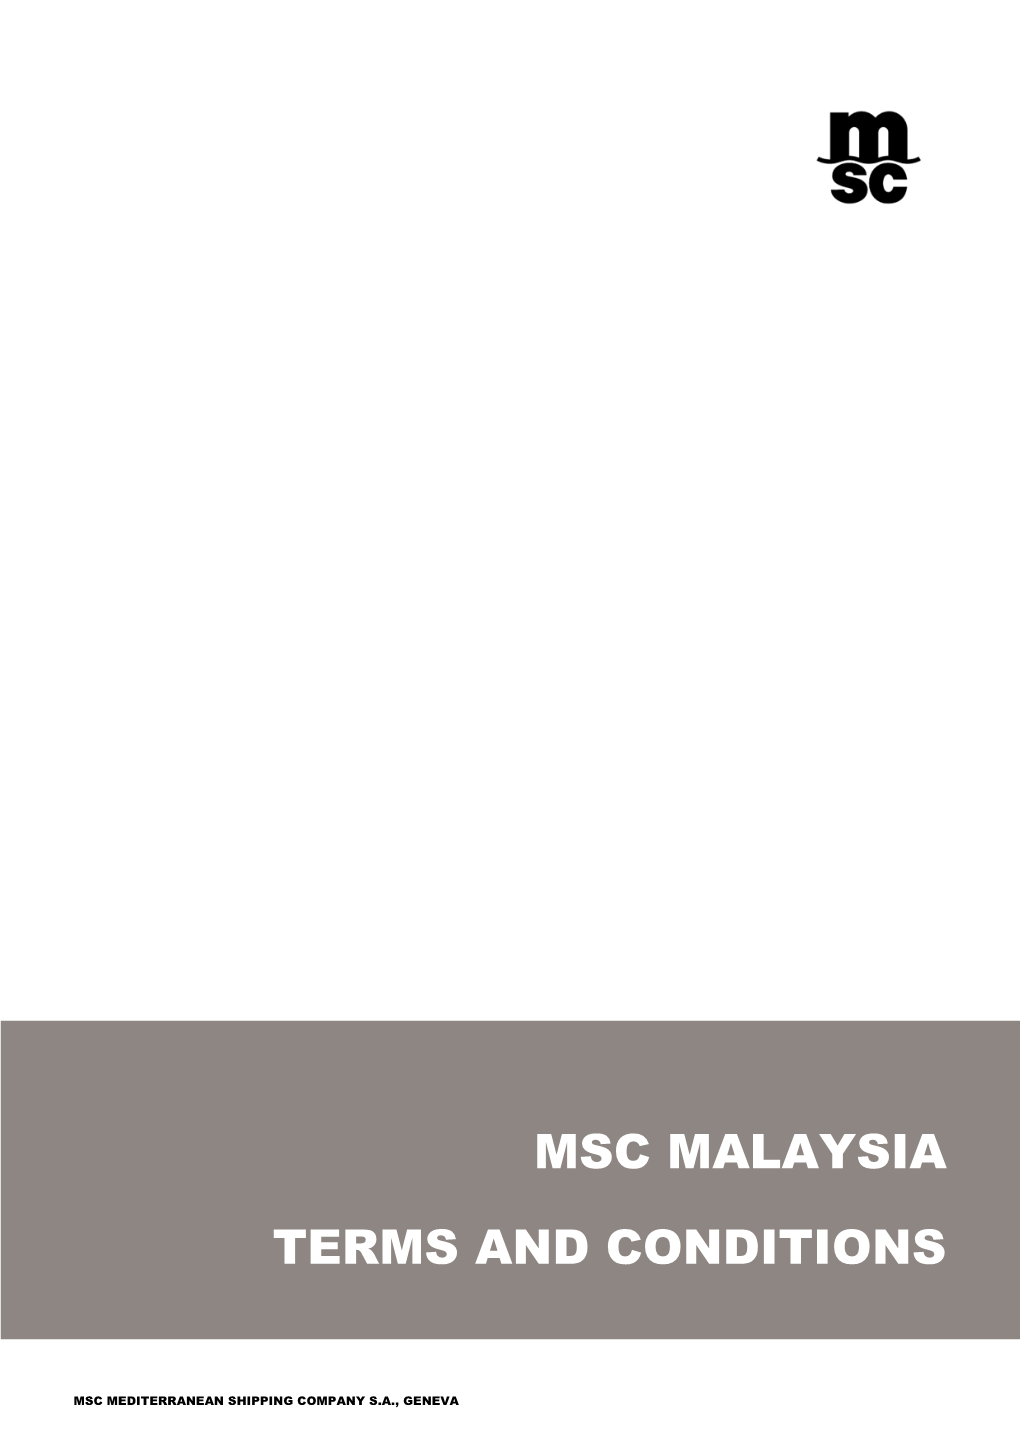 Msc Malaysia Terms and Conditions